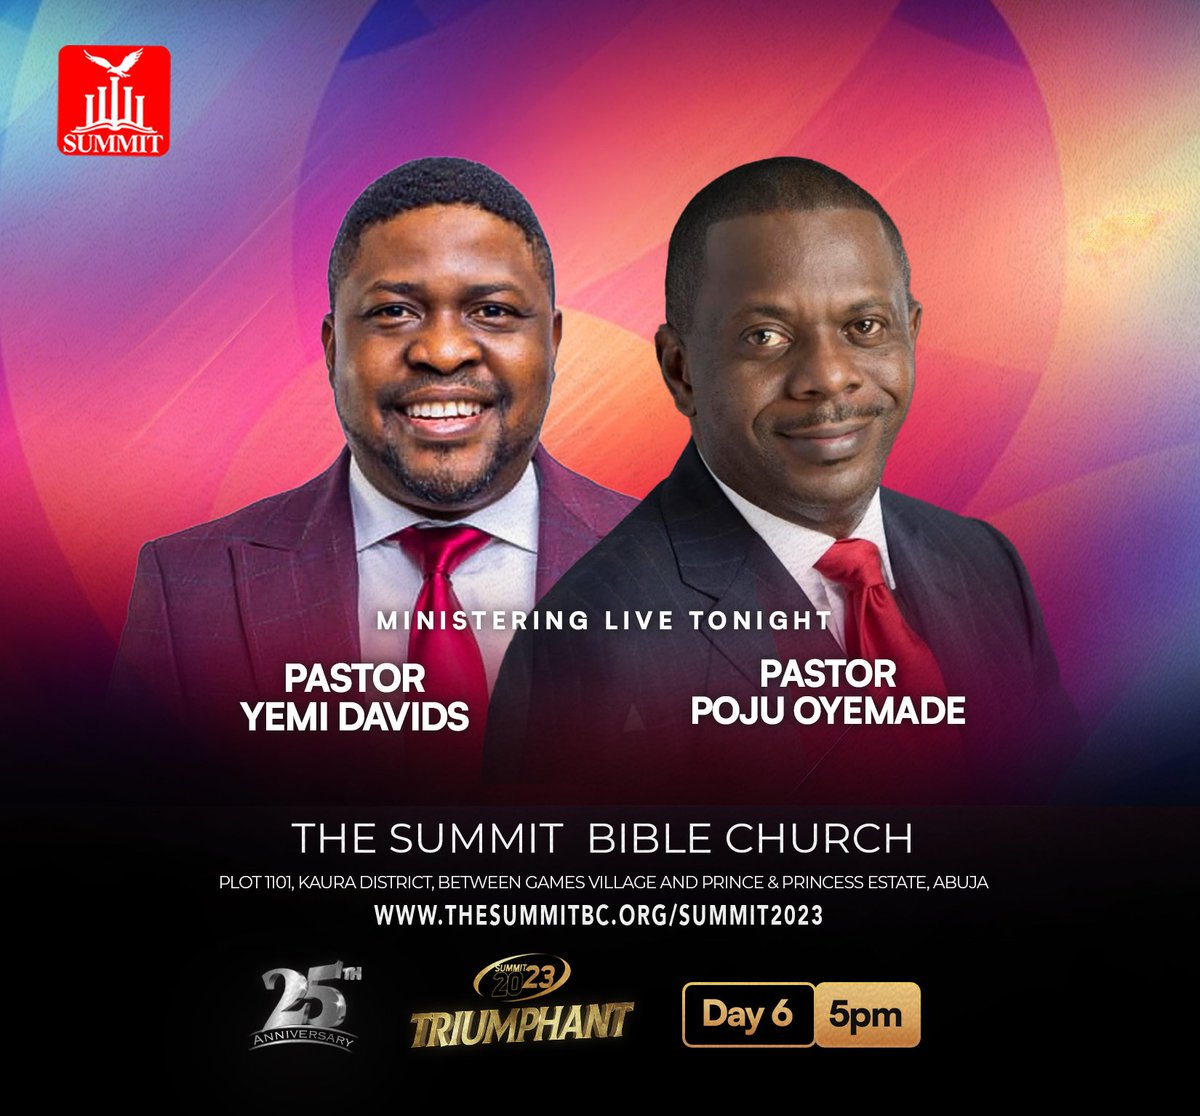 Get ready for an encounter. See you this evening. copied @SummitAbuja

@pastorpoju
@YemiDavids

#Day6
#Summit2023
#Triumphant
#SummitConference